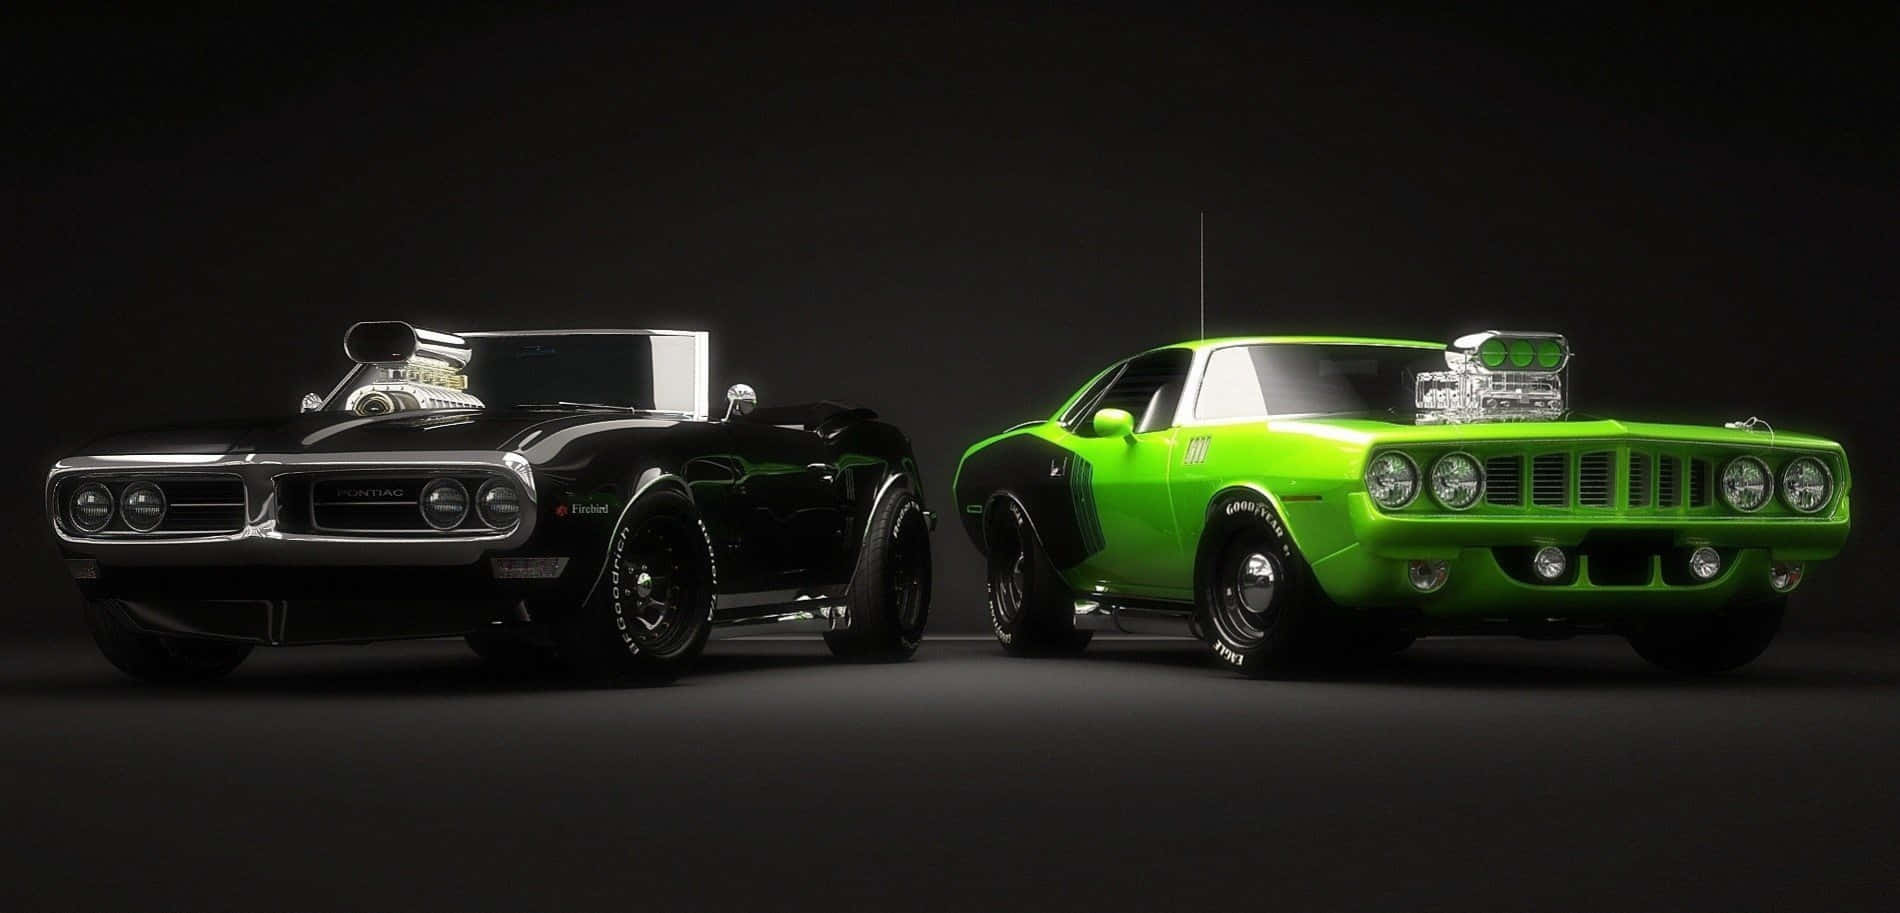 Two Toy Cars In Black And Green